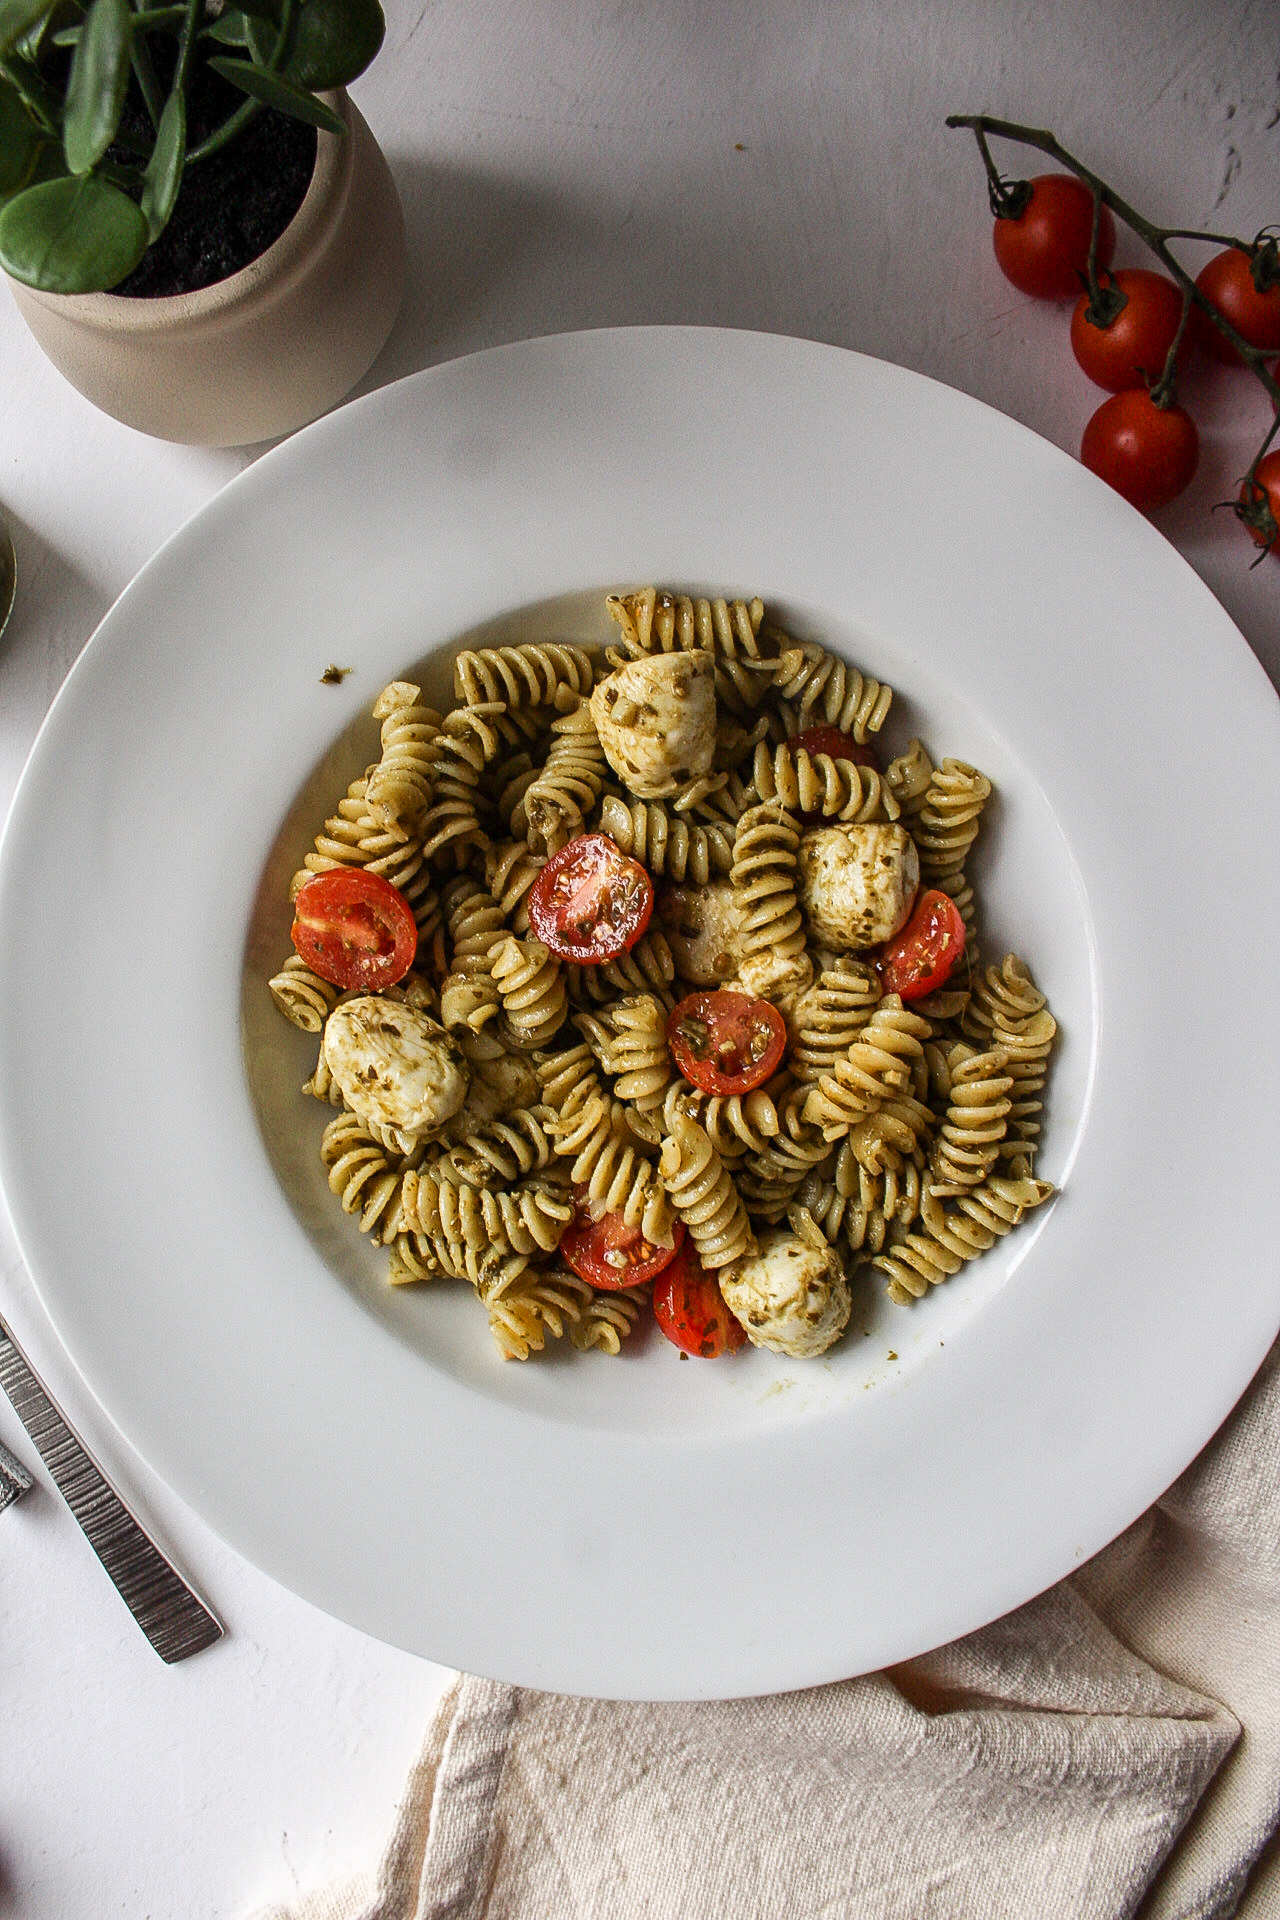 pesto, mozzarella, tomatoes, and pasta in a bowl mixed together.